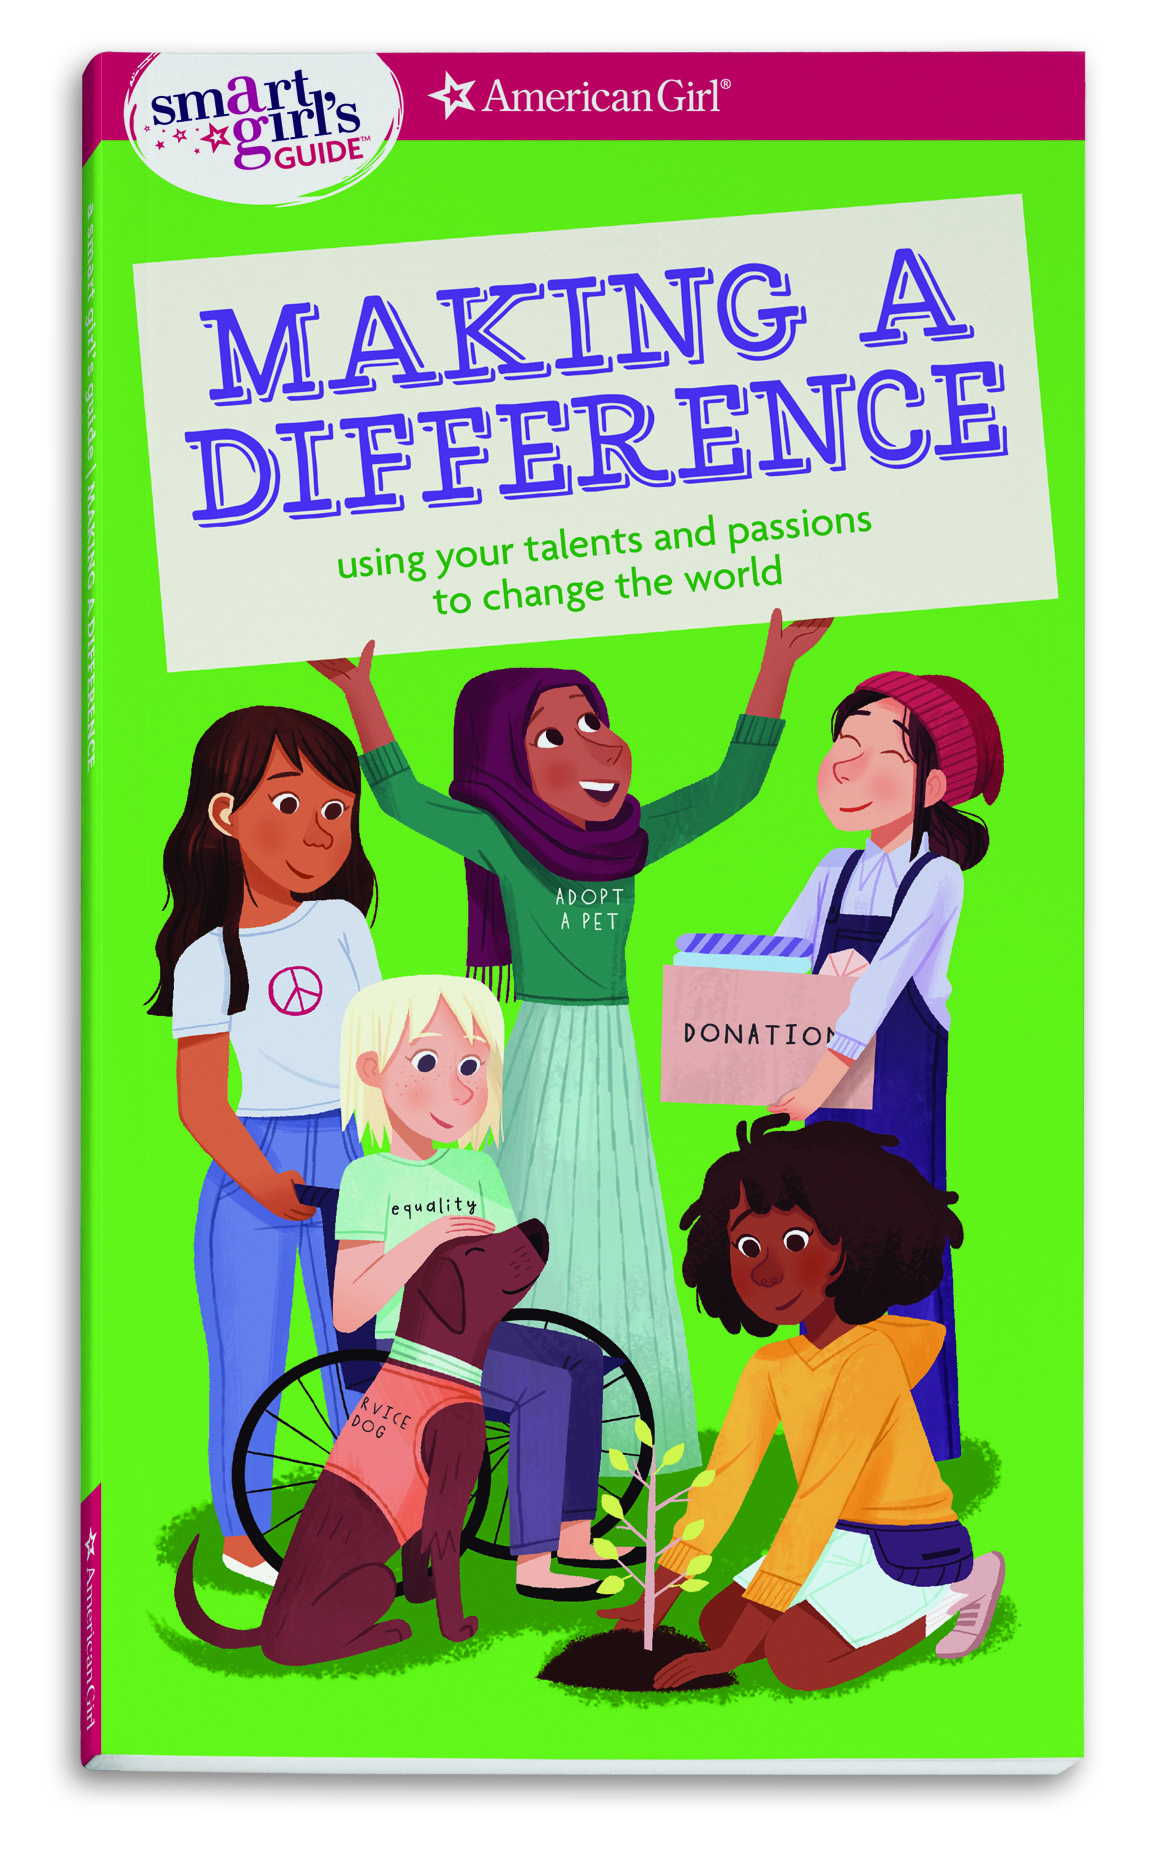 A Smart Girl’s Guide: Making a Difference